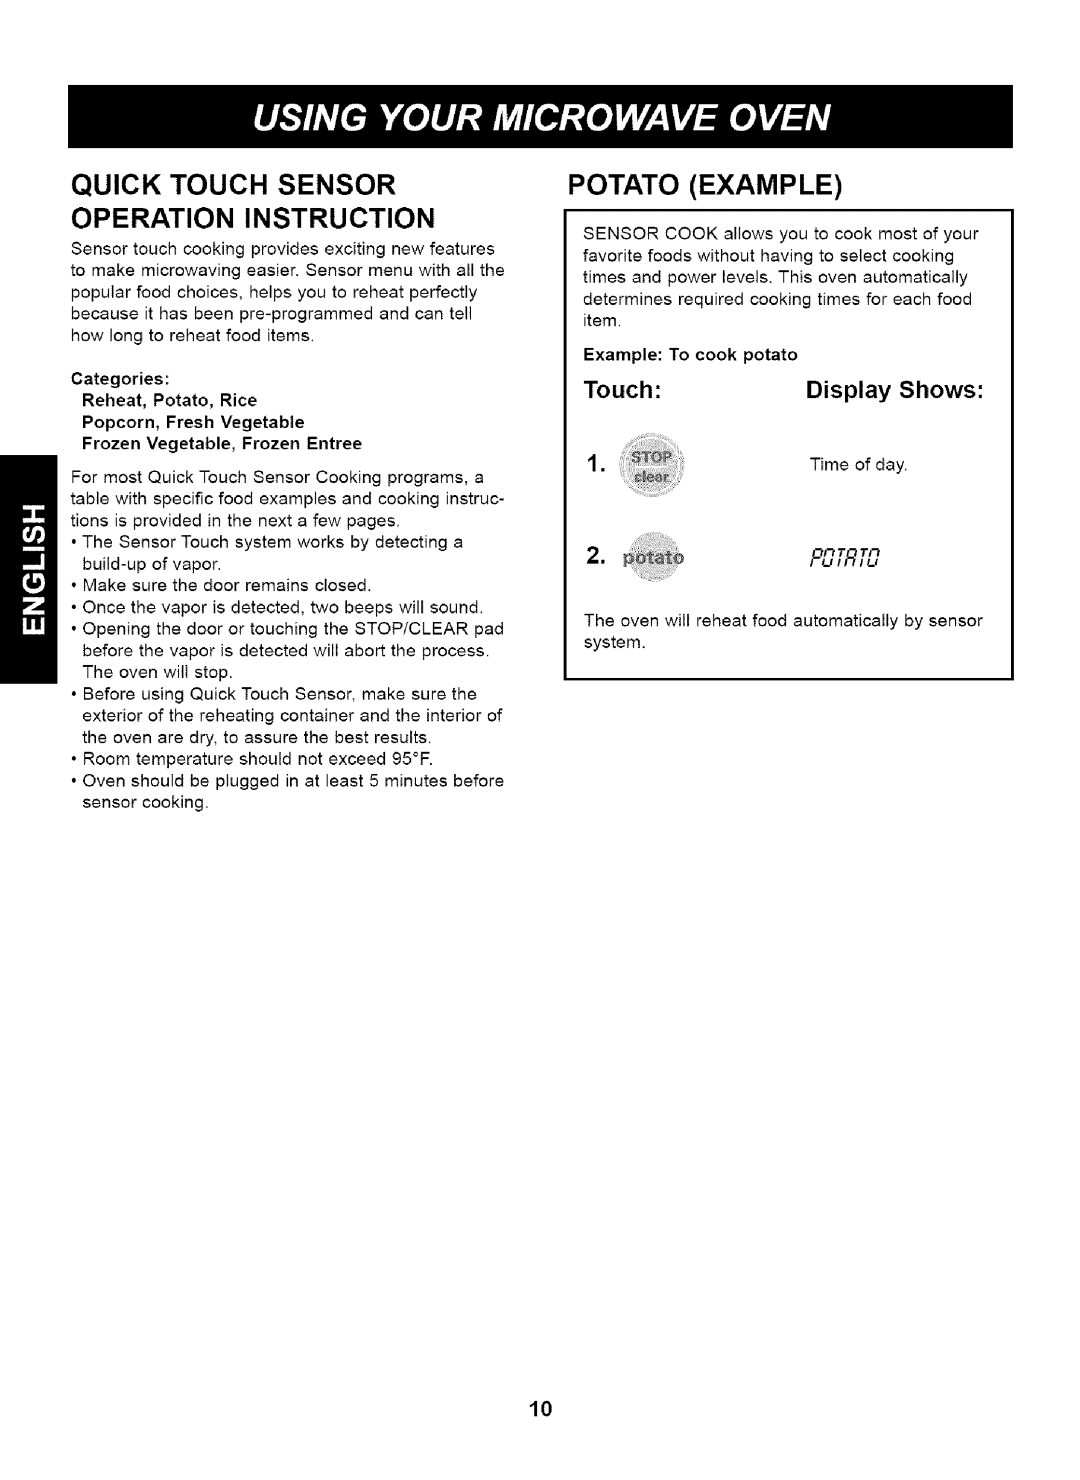 Kenmore 721.63263 manual Quick Touch Sensor Operation Instruction, Potato Example, Display Shows 